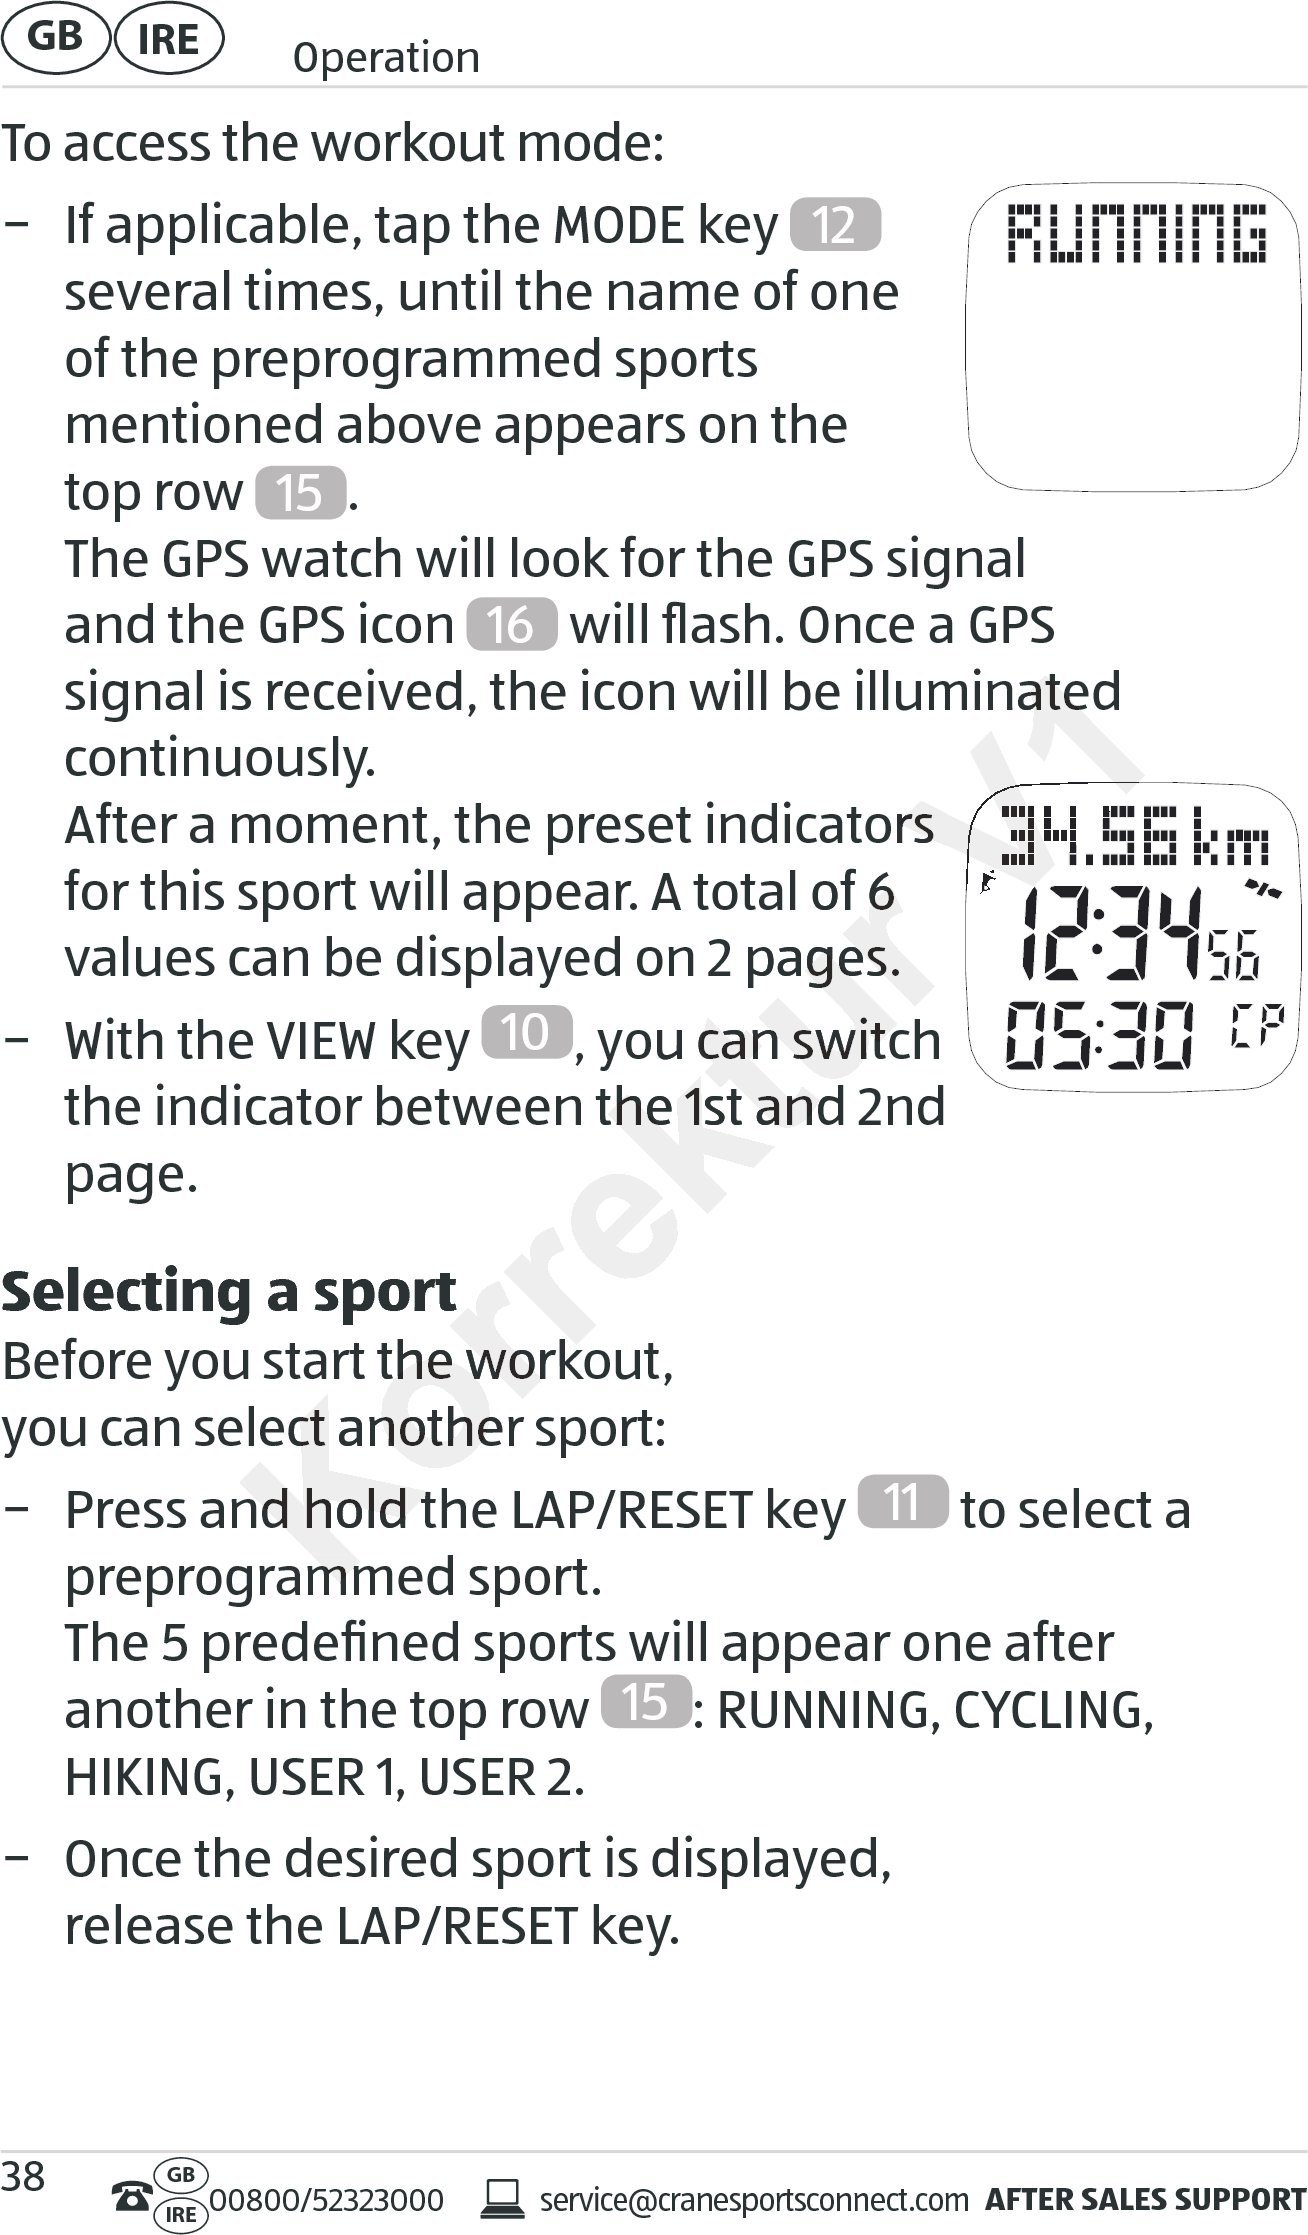 AFTER SALES SUPPORTservice@cranesportsconnect.comGBIRE 00800/52323000IRE OperationGB 38To access the workout mode: − If applicable, tap the MODE key  12   several times, until the name of one  of the preprogrammed sports  mentioned above appears on the  top row  15 . The GPS watch will look for the GPS signal  and the GPS icon  16  will ﬂash. Once a GPS  signal is received, the icon will be illuminated continuously. After a moment, the preset indicators  for this sport will appear. A total of 6 values can be displayed on 2 pages. − With the VIEW key  10 , you can switch the indicator between the 1st and 2nd page.Selecting a sportBefore you start the workout,  you can select another sport: − Press and hold the LAP/RESET key  11  to select a preprogrammed sport. The 5 predeﬁned sports will appear one after  another in the top row  15 : RUNNING, CYCLING,  HIKING, USER 1, USER 2. − Once the desired sport is displayed,  release the LAP/RESET key.for this sport will appear. A total of 6 for this sport will appear. A total of 6 values can be displayed on 2 pages.values can be displayed on 2 pages., you can switch , you can switch the indicator between the 1st and 2nd the indicator between the 1st and 2nd Selecting a sportSelecting a sportBefore you start the workout, Before you start the workout, you can select another sport:you can select another sport:− Press and hold the LAP/RESET− Press and hold the LAP/RESETpreprogrammed sport. preprogrammed sport. V1signal is received, the icon will be illuminated signal is received, the icon will be illuminated After a moment, the preset indicators  After a moment, the preset indicators  V1V1V1V1V1V1V1V1V1V1V1V1V1V1V1V1V1V1V1V1V1V1V1V1V1V1V1V1V1V1V1V1V1V1V1V1V1V1V1V1V1V1V1V1V1V1V1V1V1V1V1V1V1V1V1V1V1V1V1V1V1V1